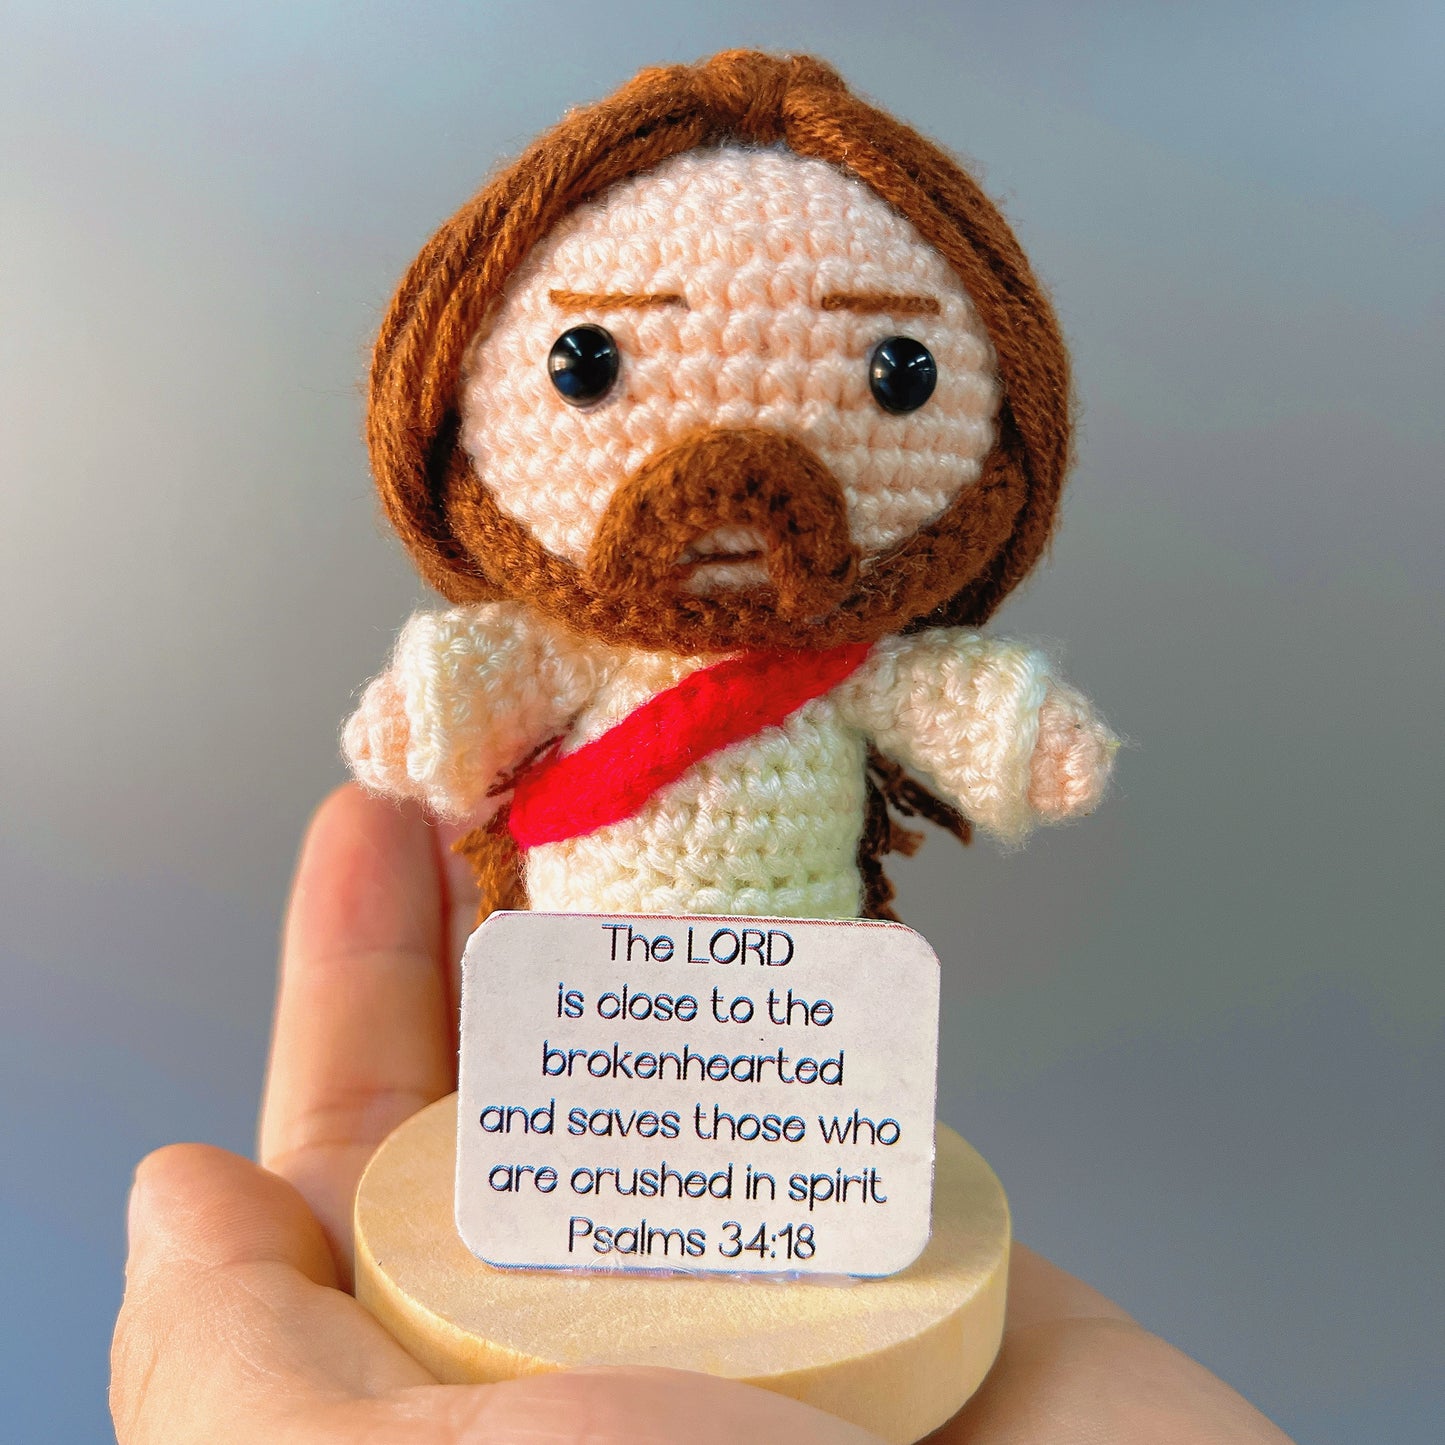 Crochet Jesus Plushie with Customizable Scripture Card - Inspirational Handcrafted Religious Gift for Christian, Catholic, Christmas, Easter, and Spiritual Emotional Support Decor